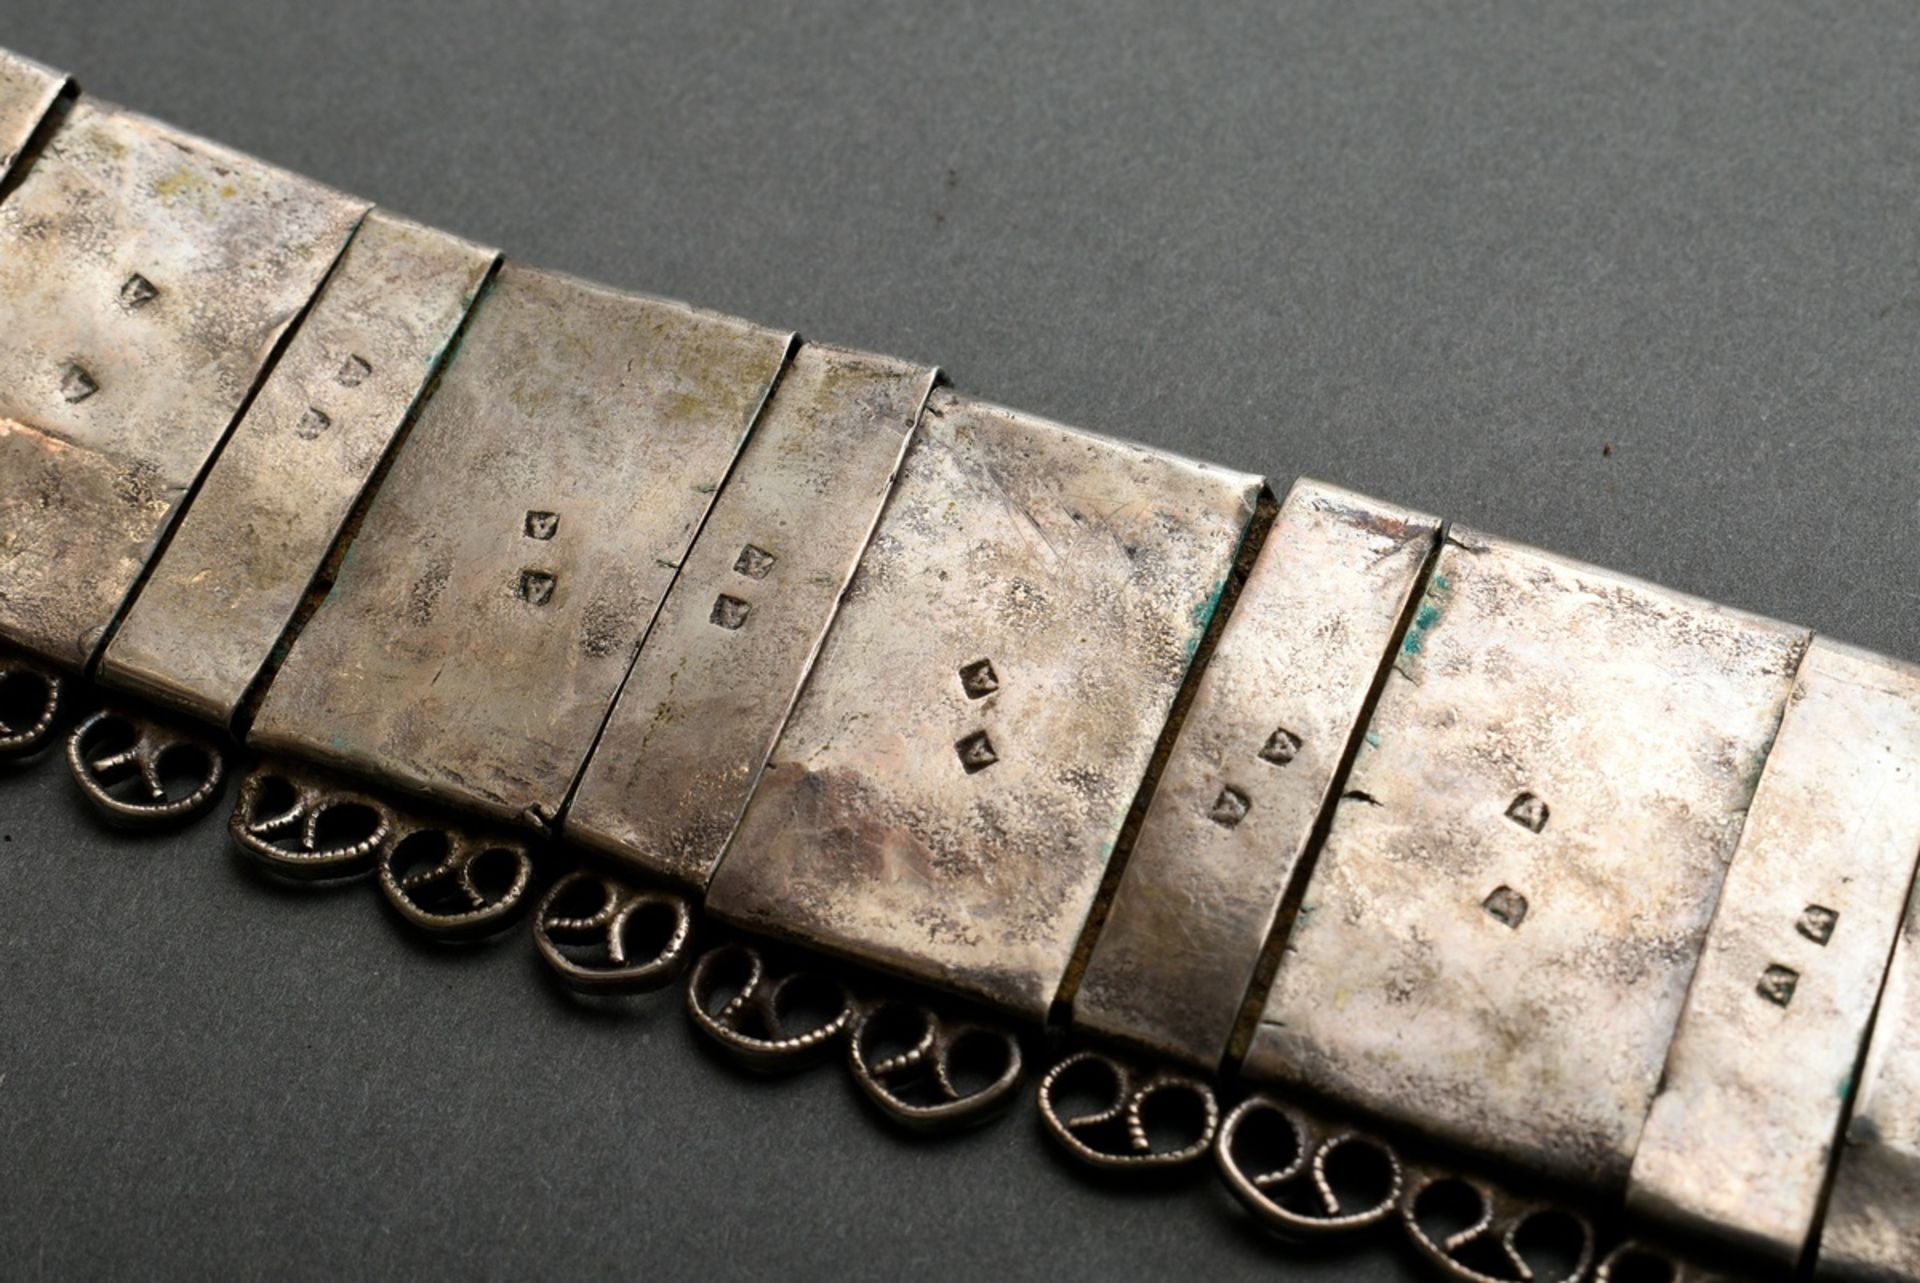 Caucasian women's belt with tendril decoration in niello work and fine chasing, soldered wire loops - Image 2 of 6